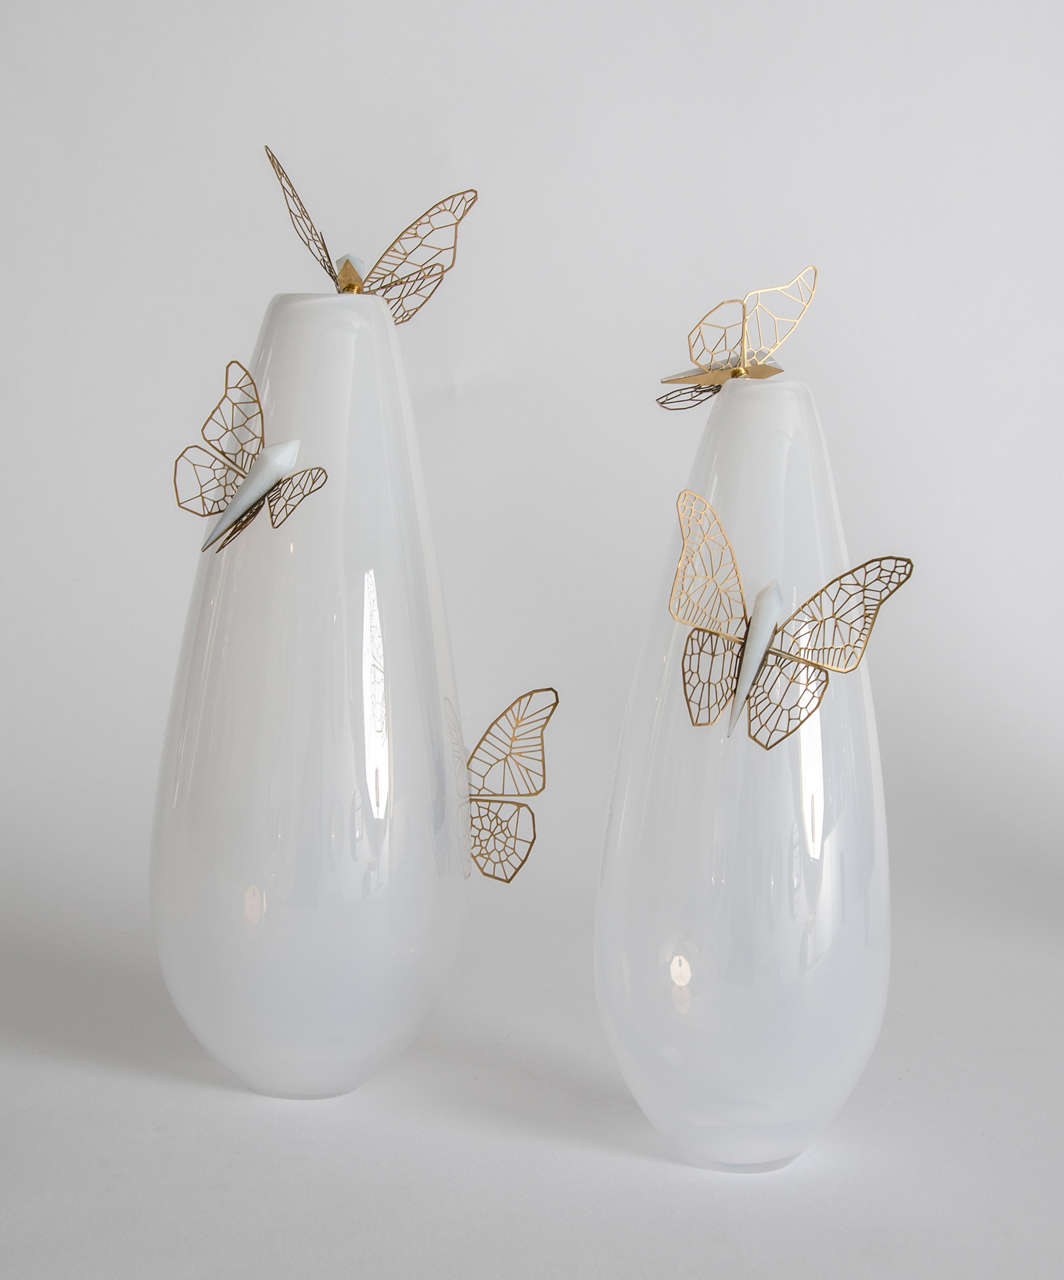 Hanne Enemark's excelling at mixing materials as demonstrated with this piece. 

Thin gold-plated etched steel butterflies, each with a different wing pattern and a white glass crystal shaped cut-glass body, sitting perched on the white